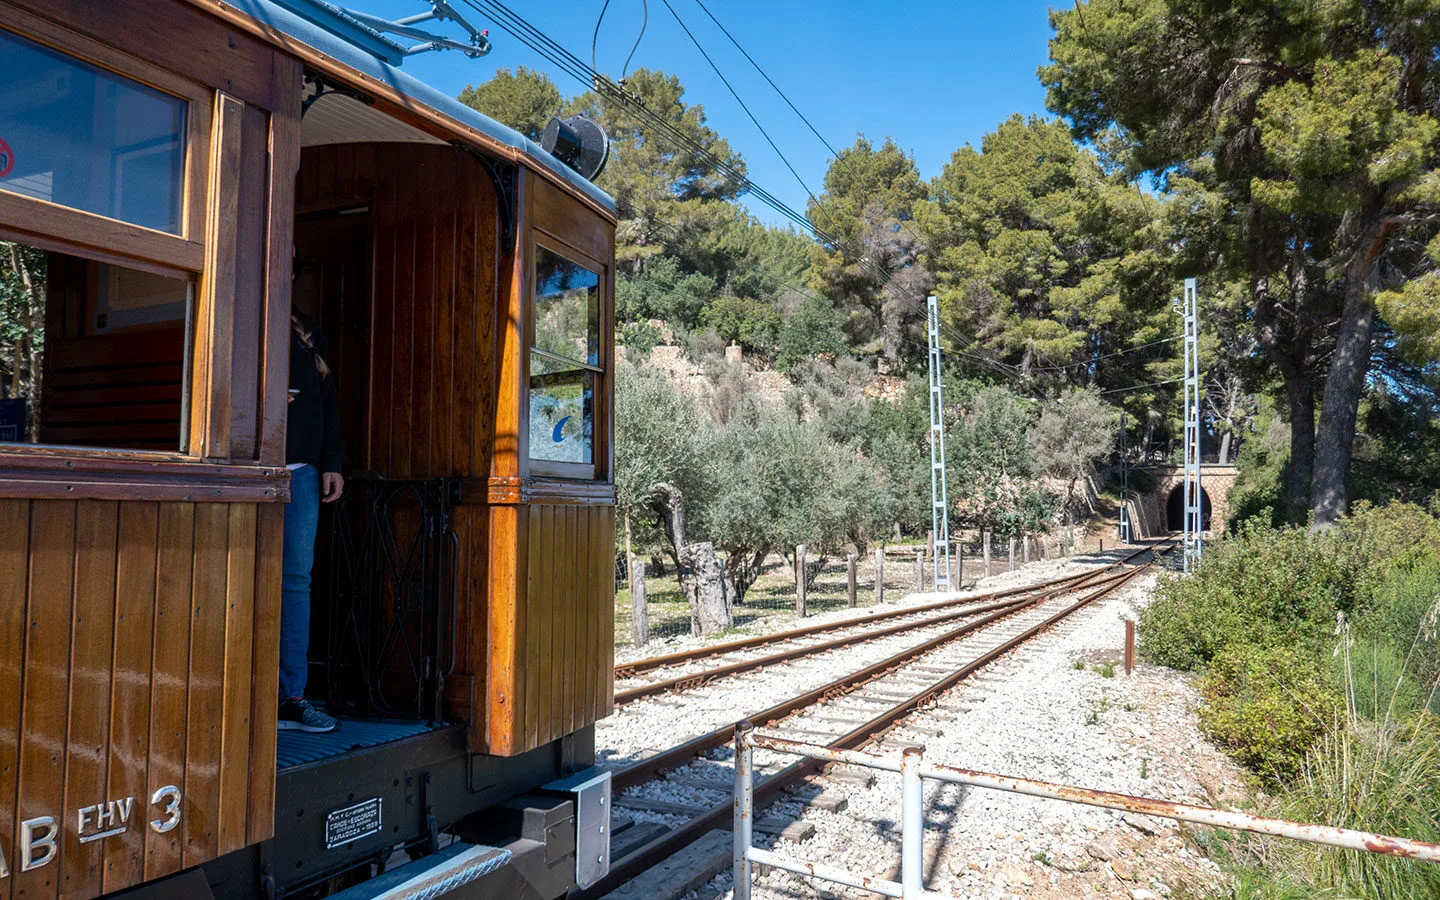 One of the tunnels along the route of the train from Palma to Soller